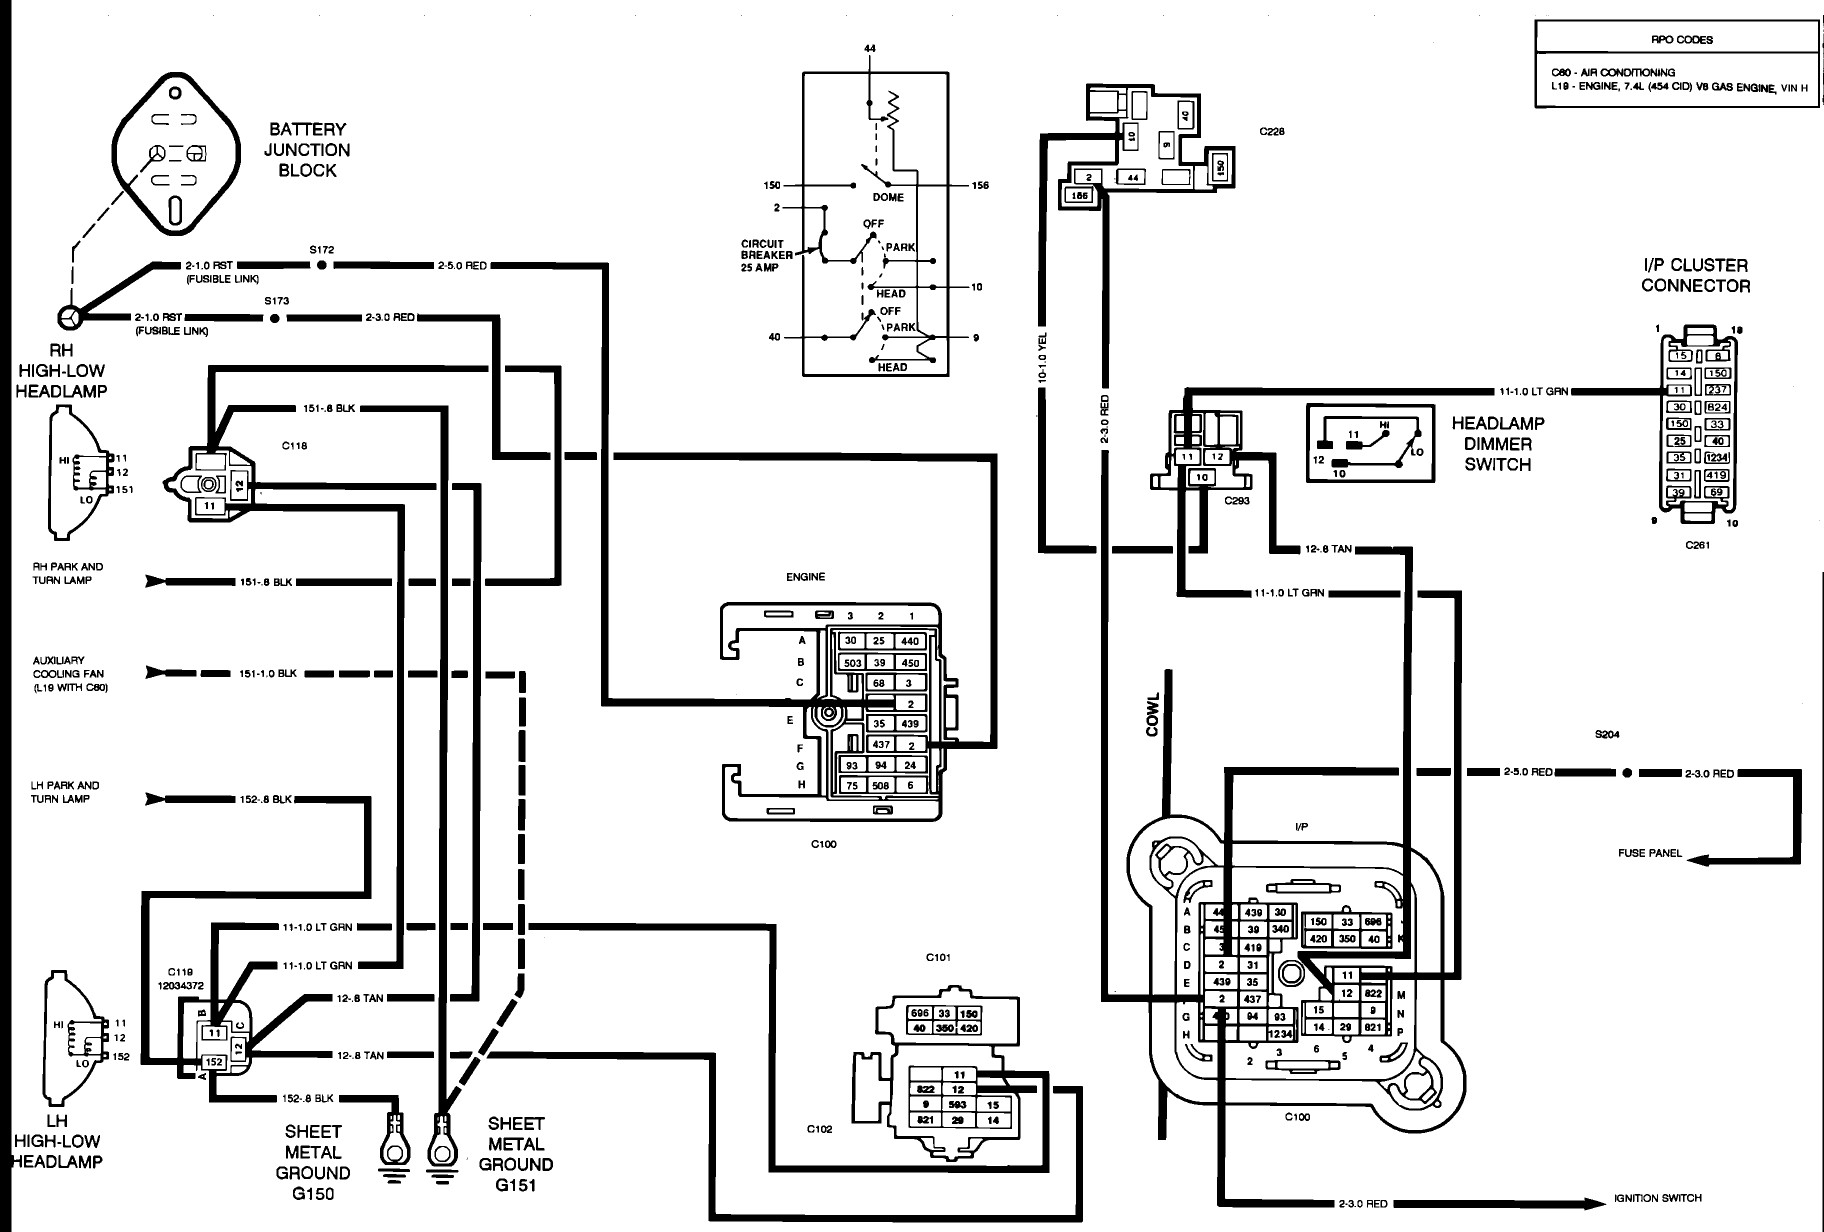 Man Truck Electrical Wiring Diagram 2wire Pickup Wiring Diagrams Wiring Wiring Diagrams Instructions Of Man Truck Electrical Wiring Diagram